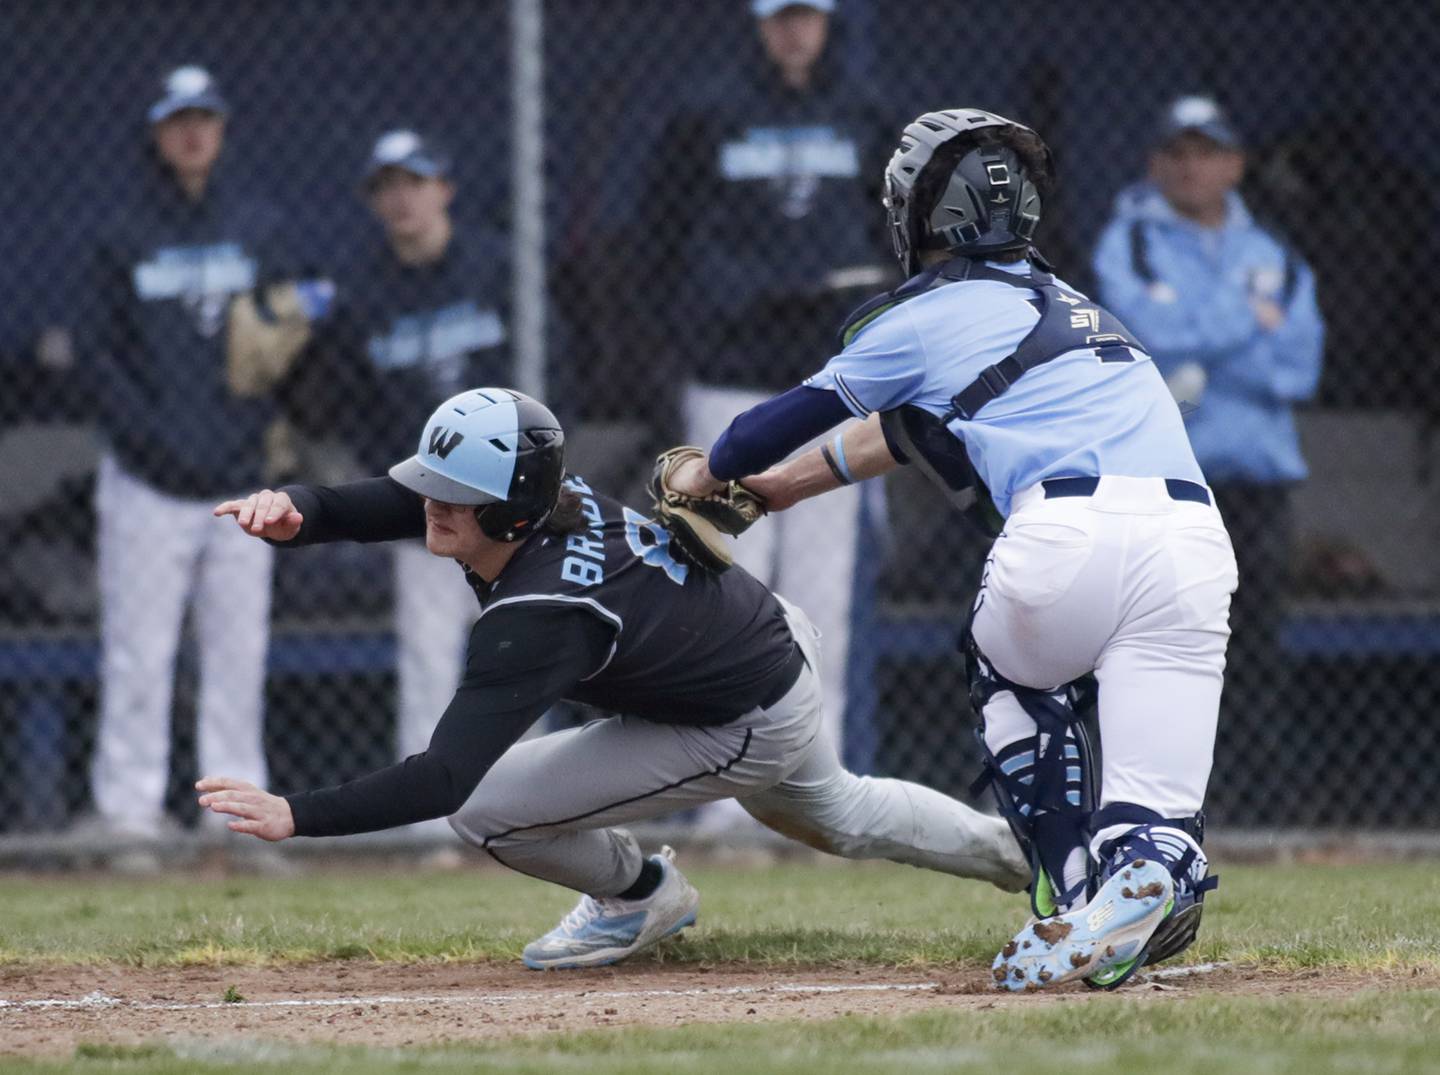 Downers Grove South’s John Szalko (7) tags out Willowbrook’s Joe Braden (8) at home plate during a game in Downers Grove on Tuesday, April 5, 2022.